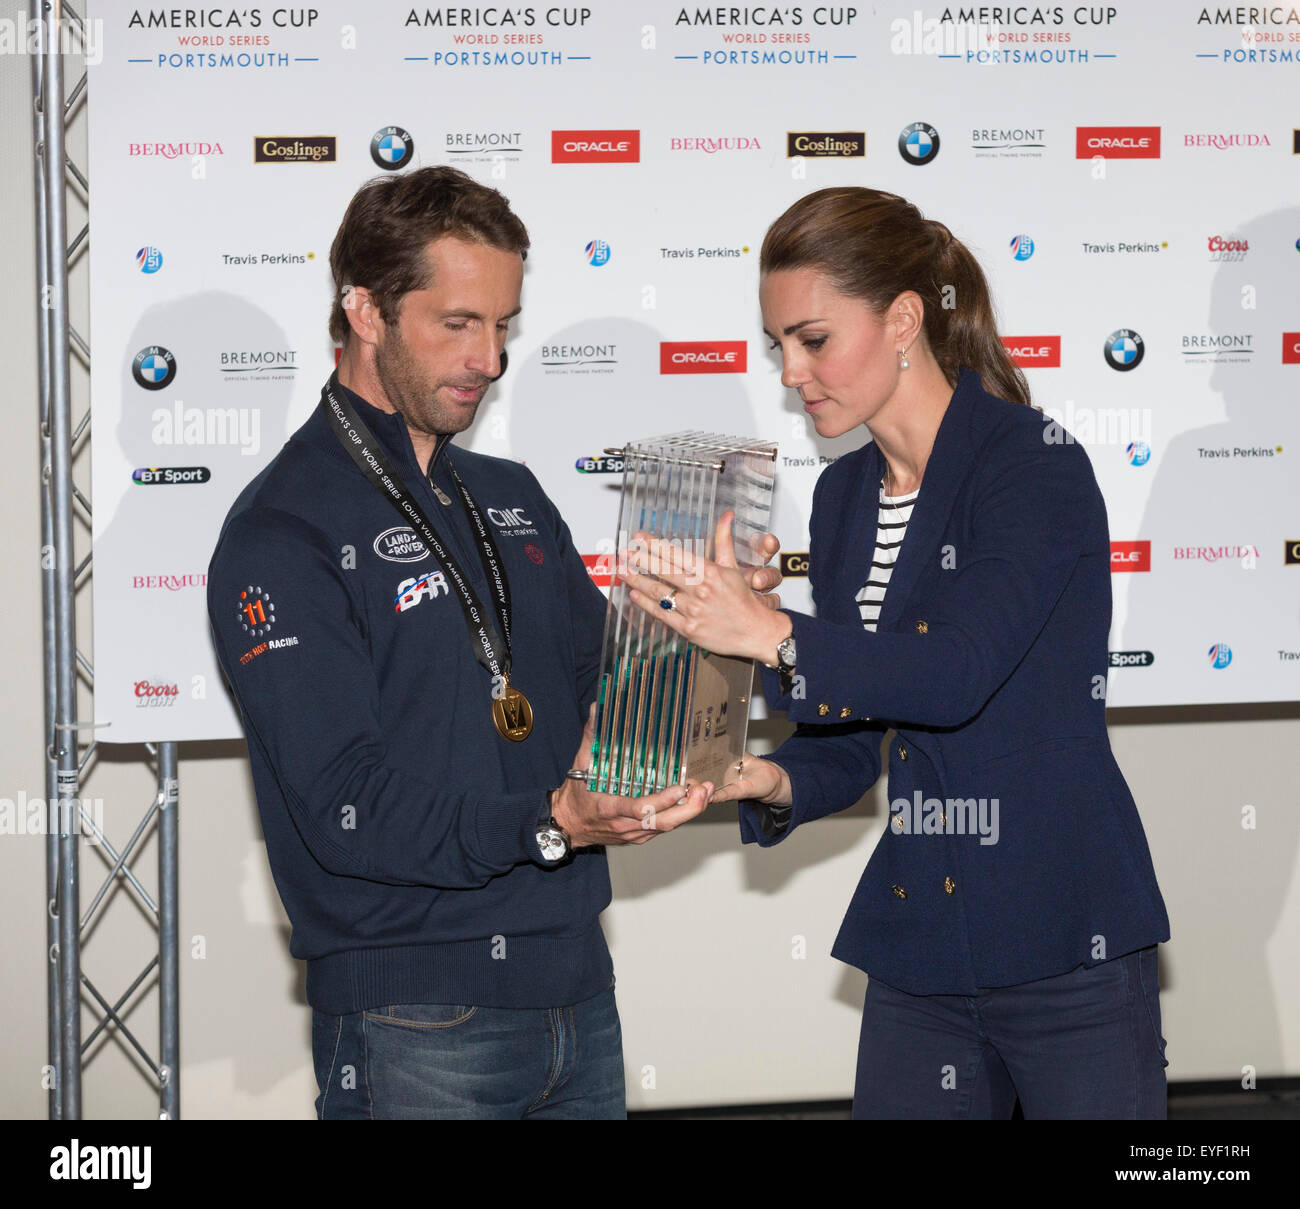 The Duchess of Cambridge presents the America's Cup World Series trophy to Sir Ben Ainslie in Portsmouth. Stock Photo